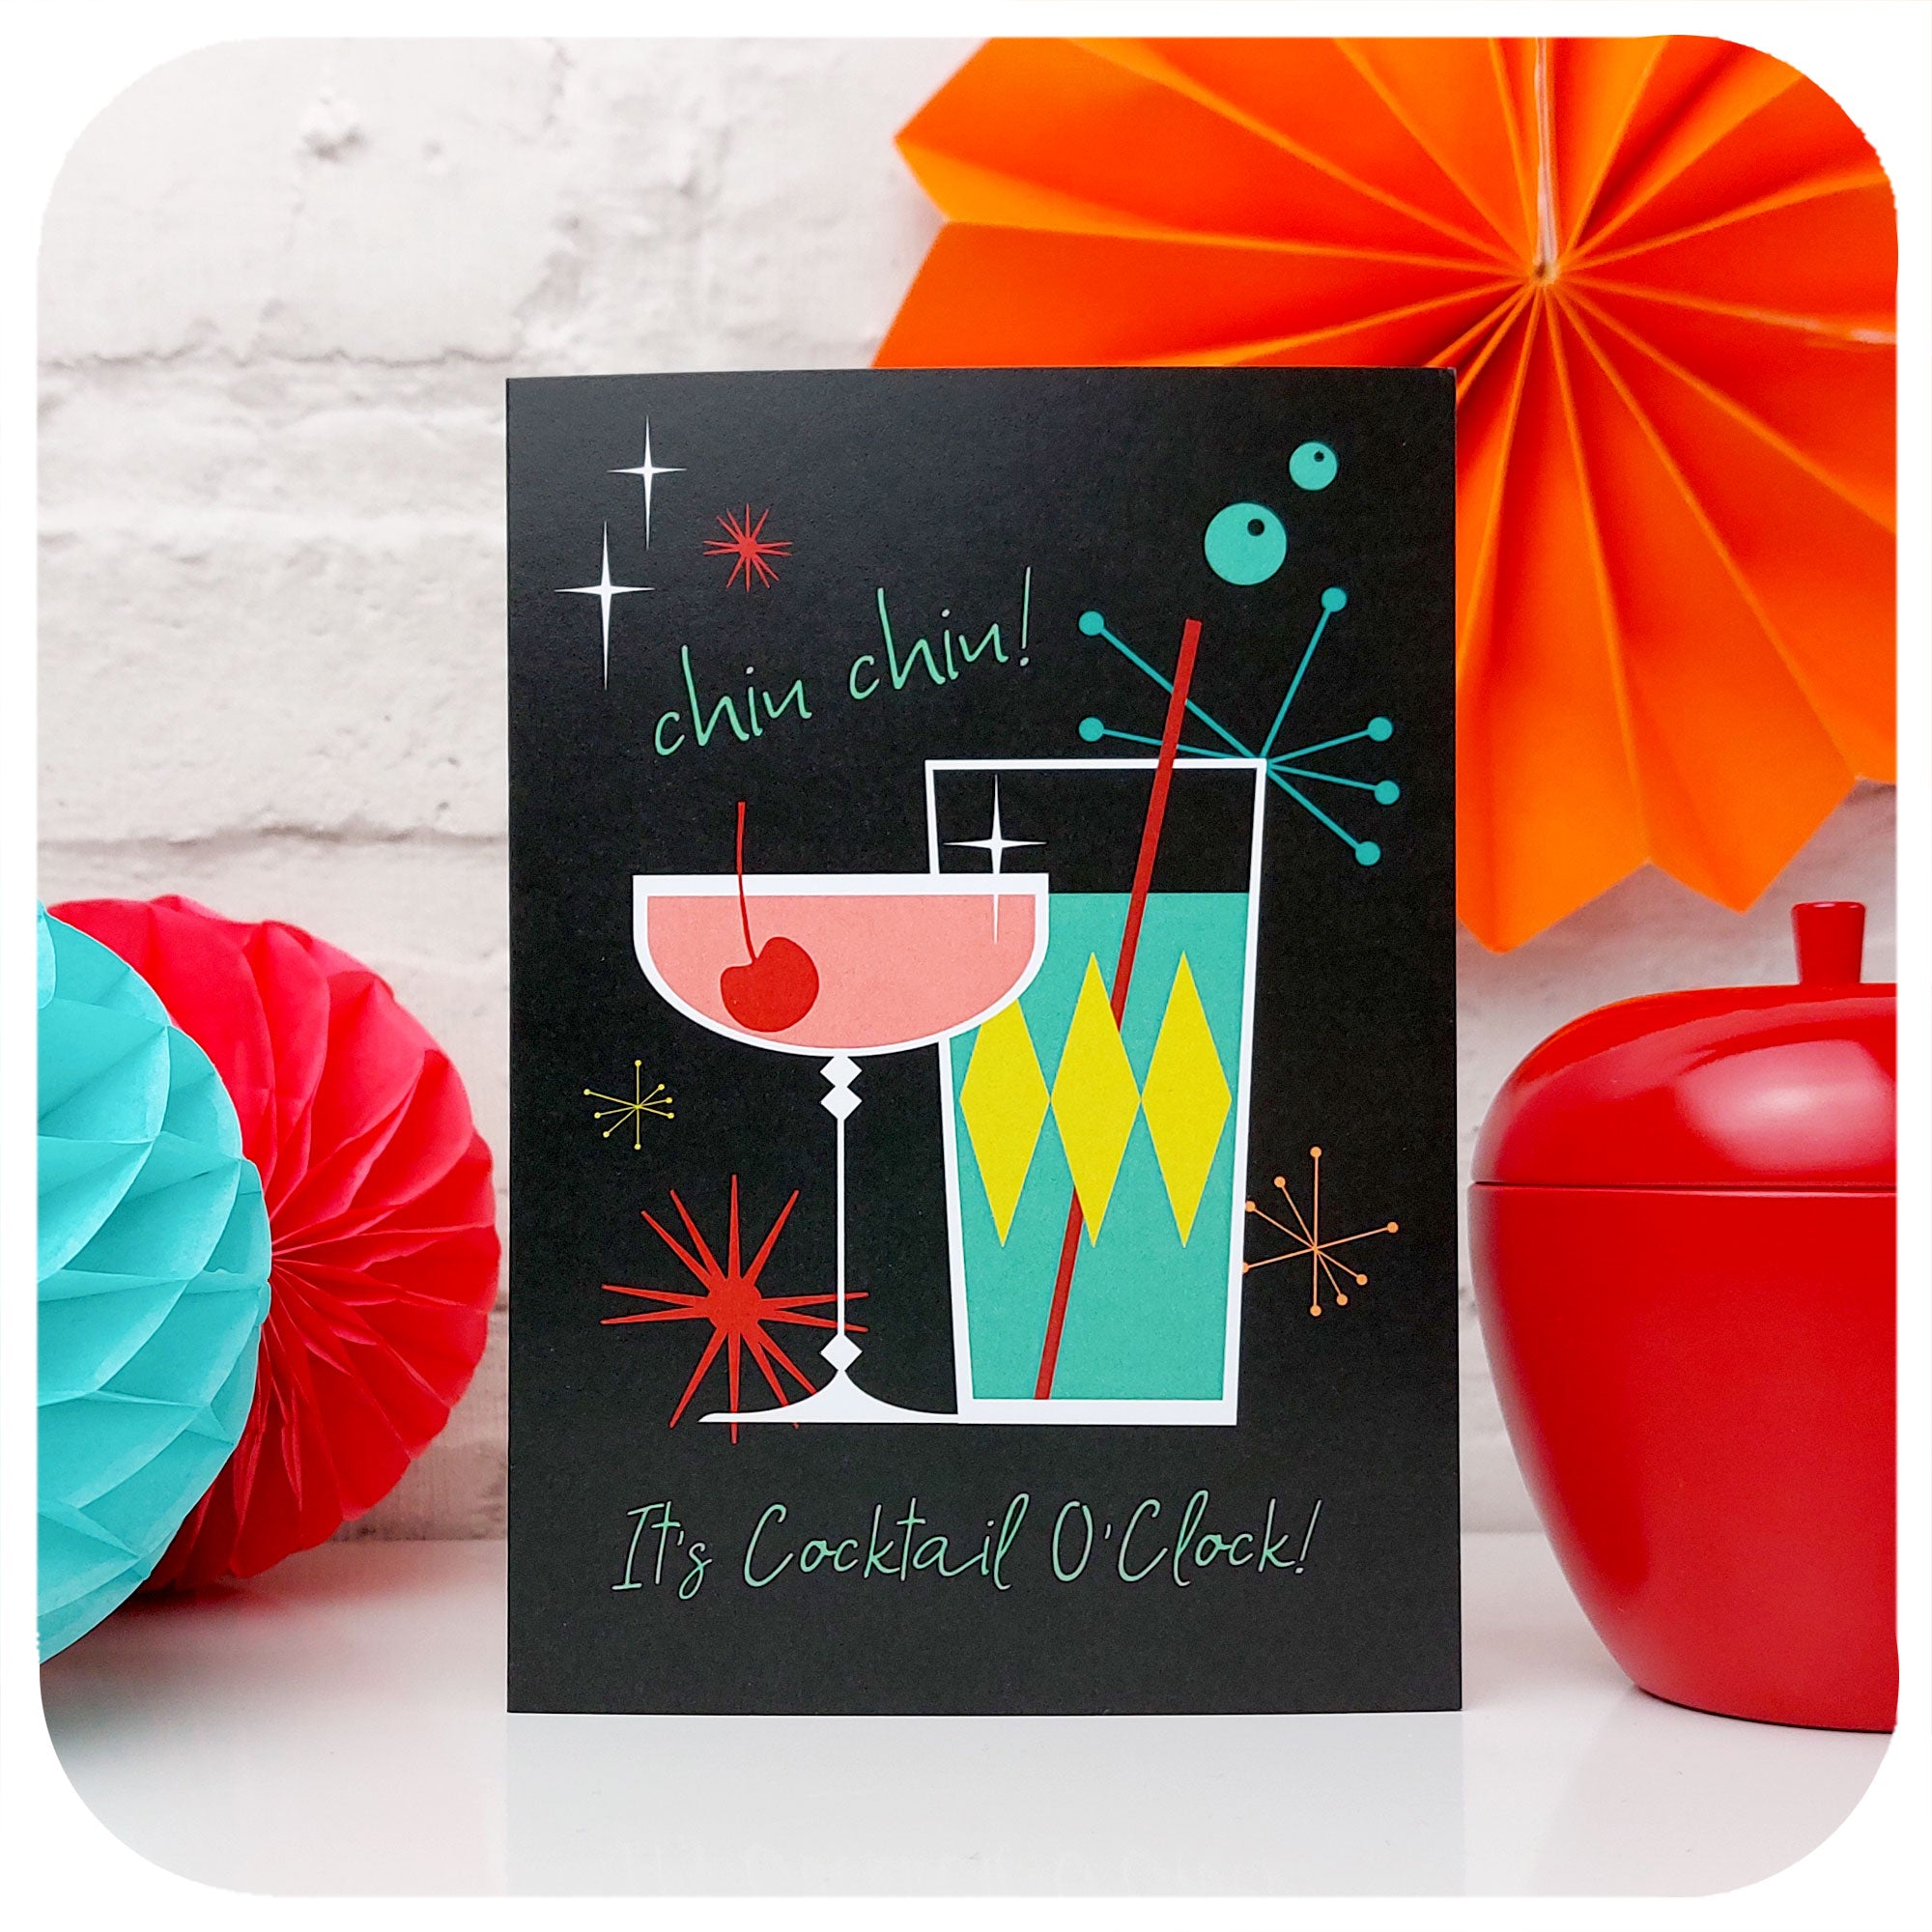 Chin Chin! It's Cocktail O'Clock Greetings Card standing in front of retro party decorations | The Inkabilly Emporium